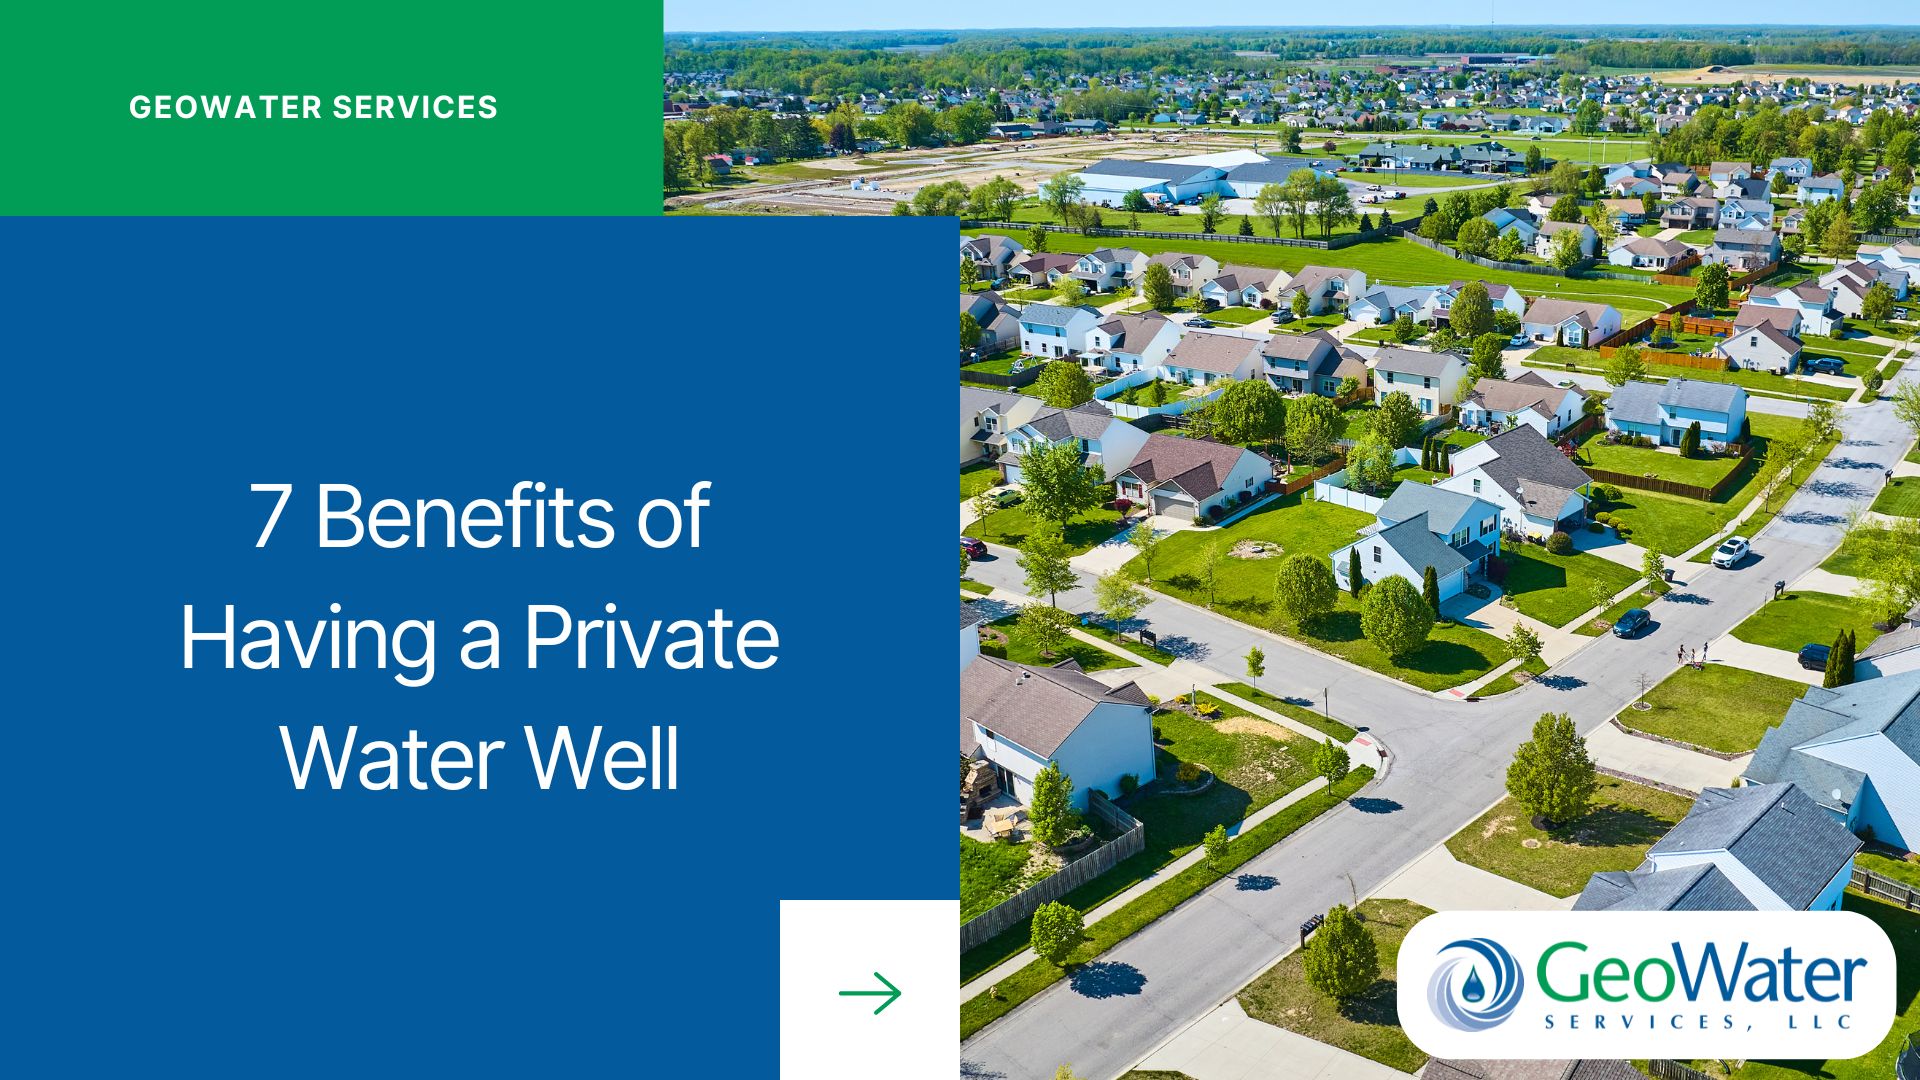 7 Benefits of Having a Private Water Well